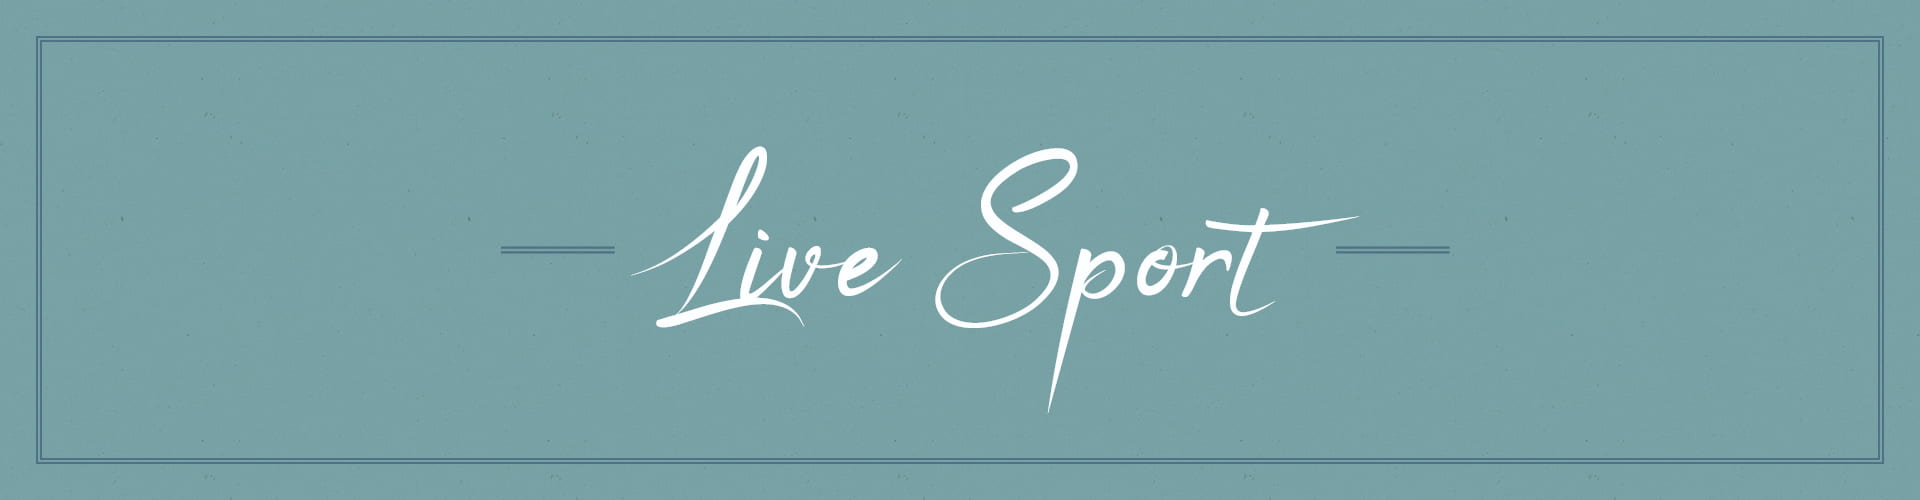 Live Sport at Feathers Hotel pub in Redhill